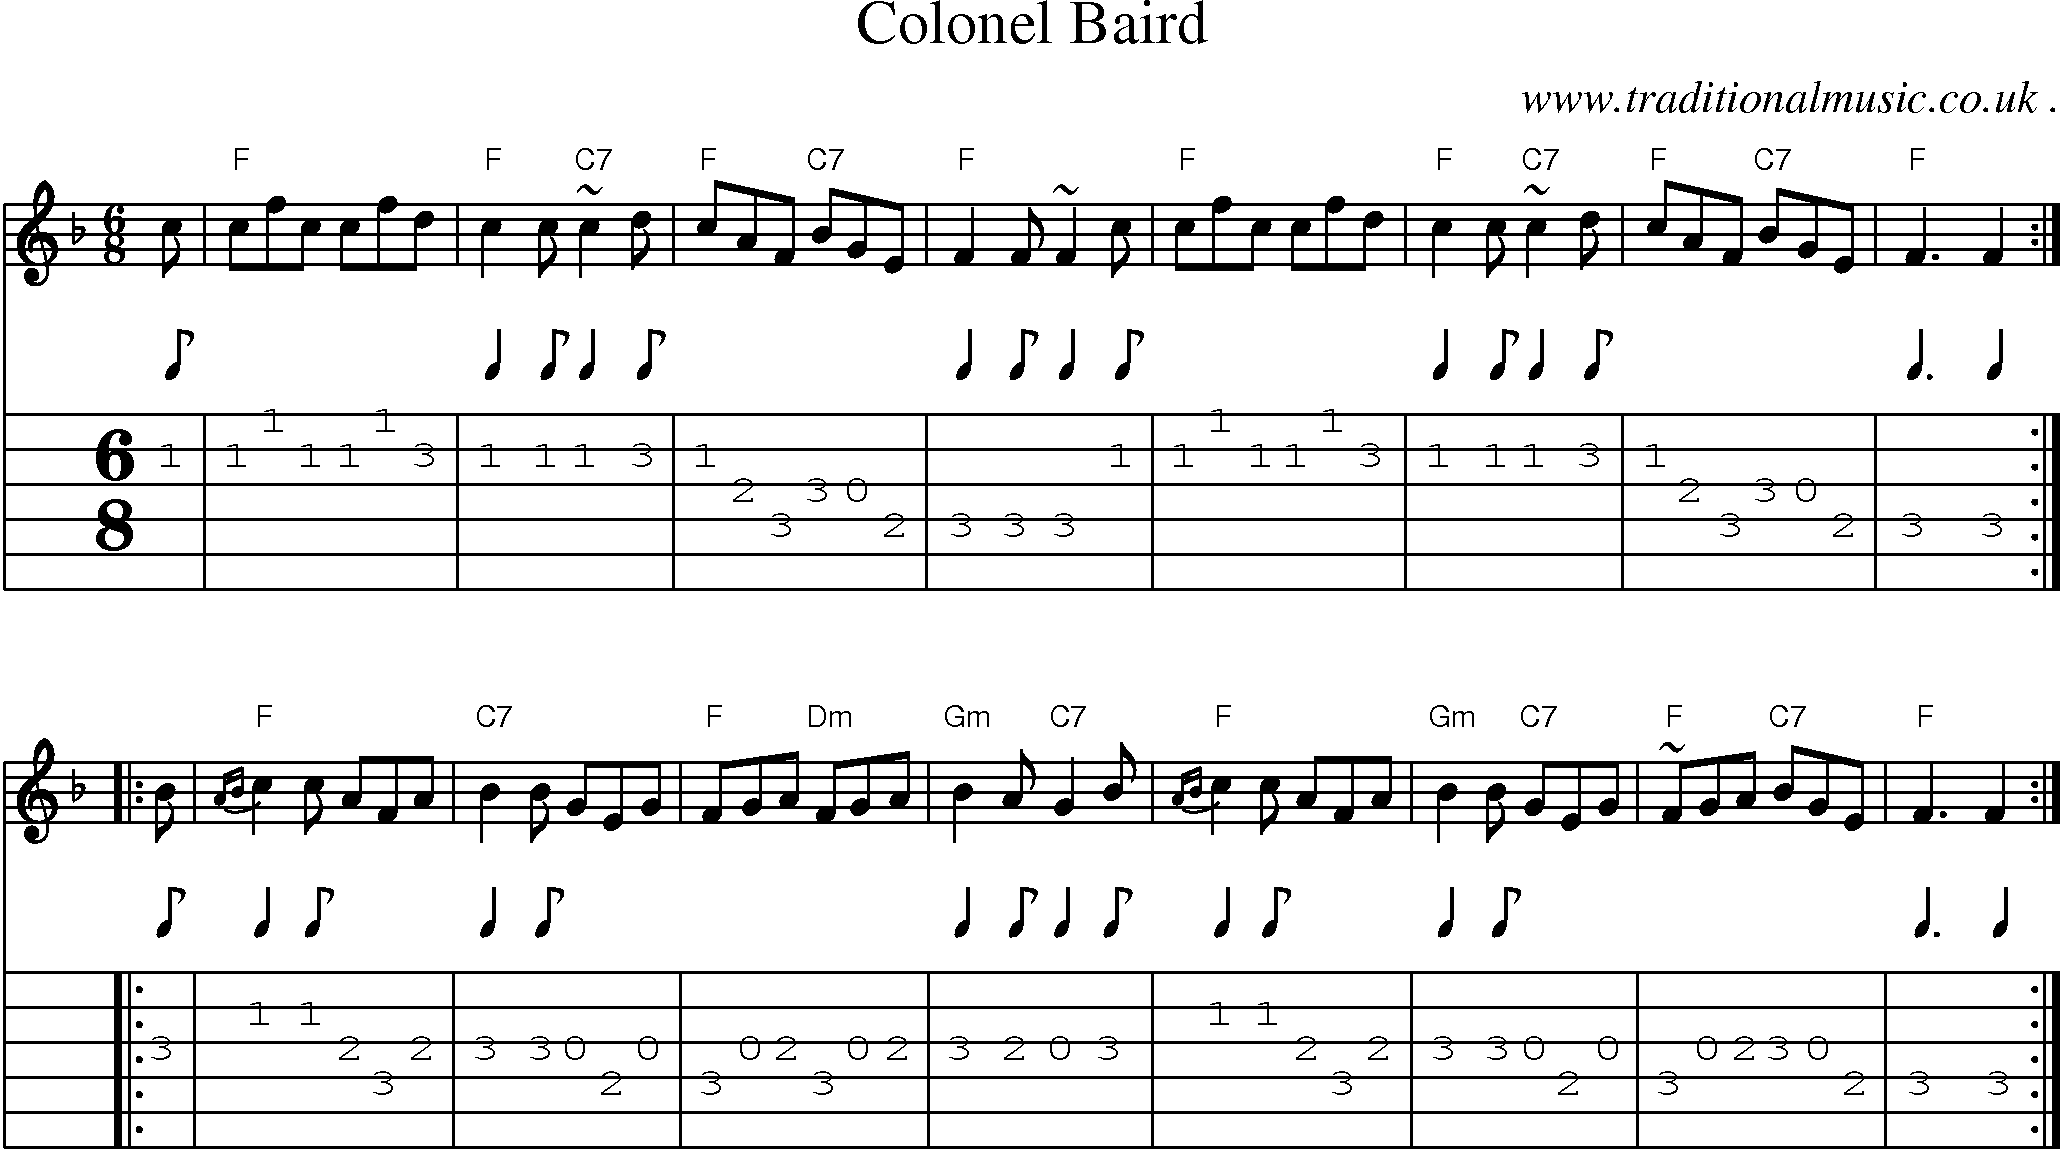 Sheet-music  score, Chords and Guitar Tabs for Colonel Baird